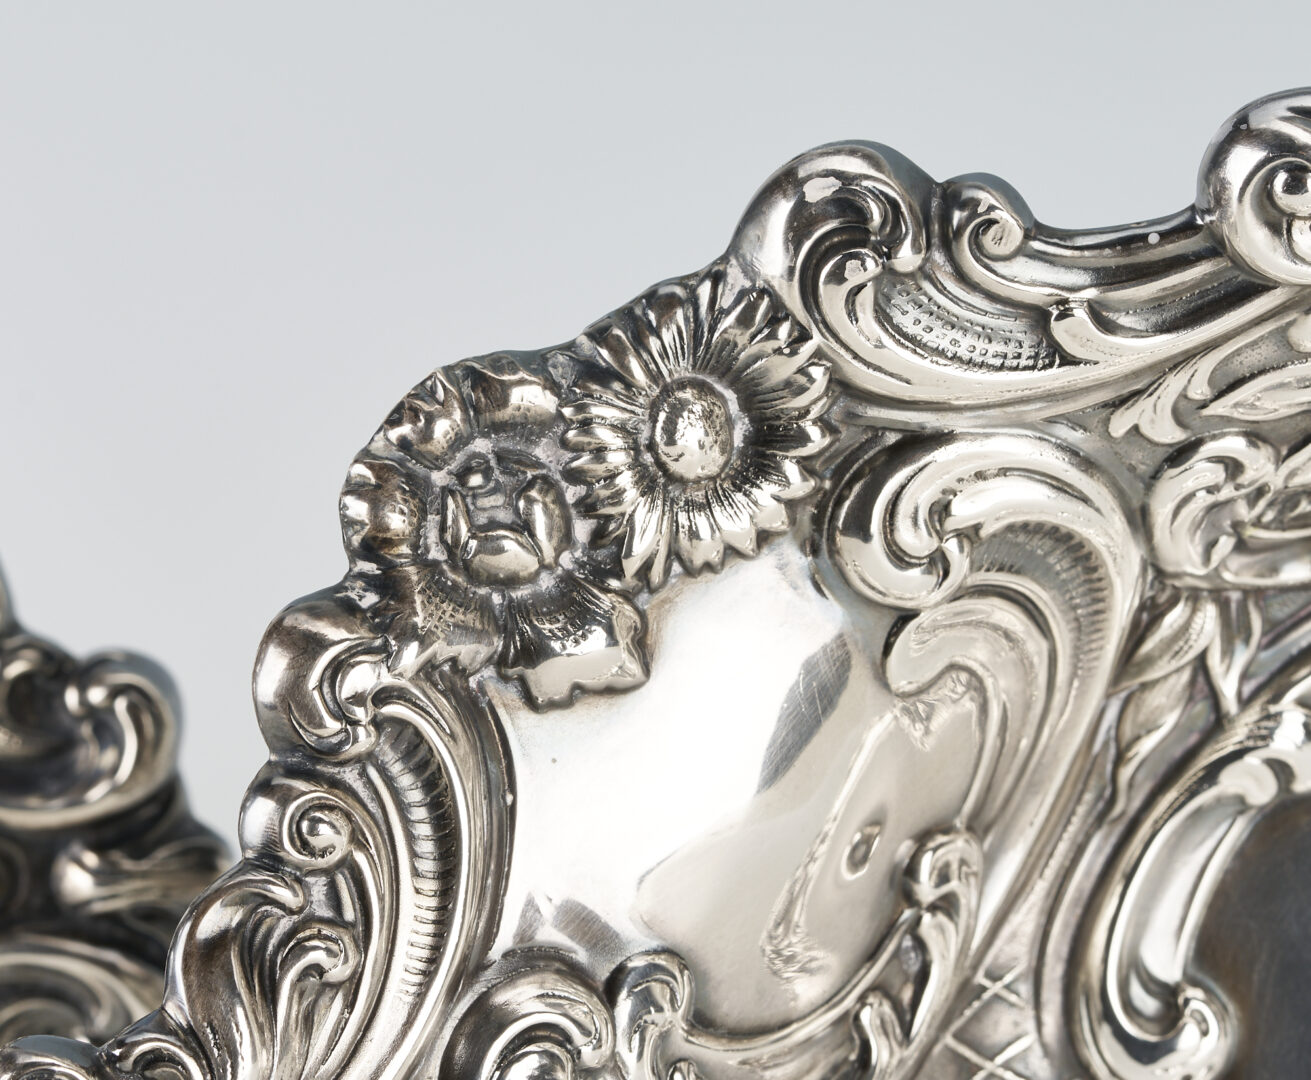 Lot 629: Pair Oval Rococo Style Sterling Silver Serving Dishes, Dominick & Haff